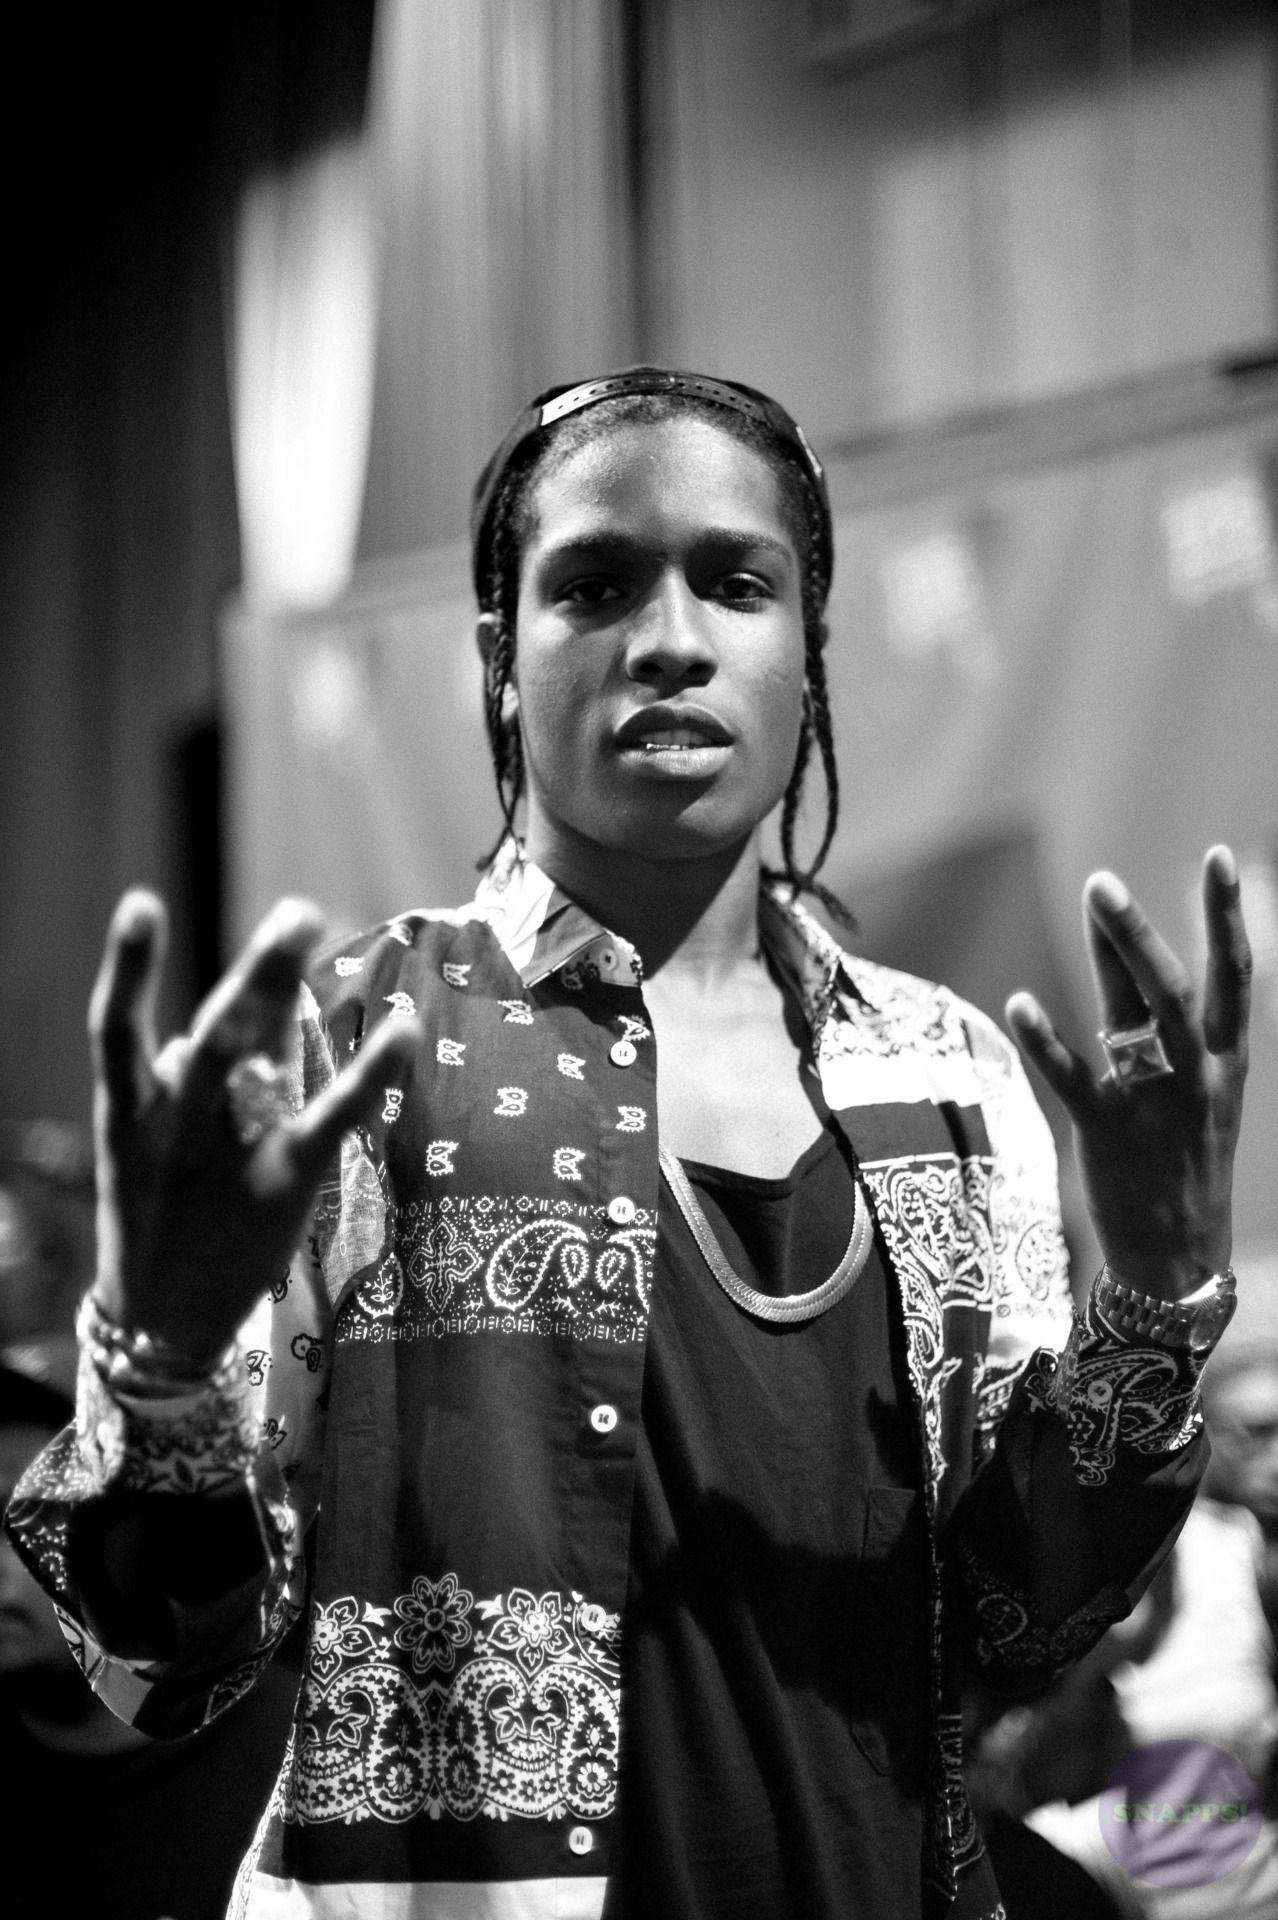 Asap Rocky Wallpaper for iPhone (72+ images)